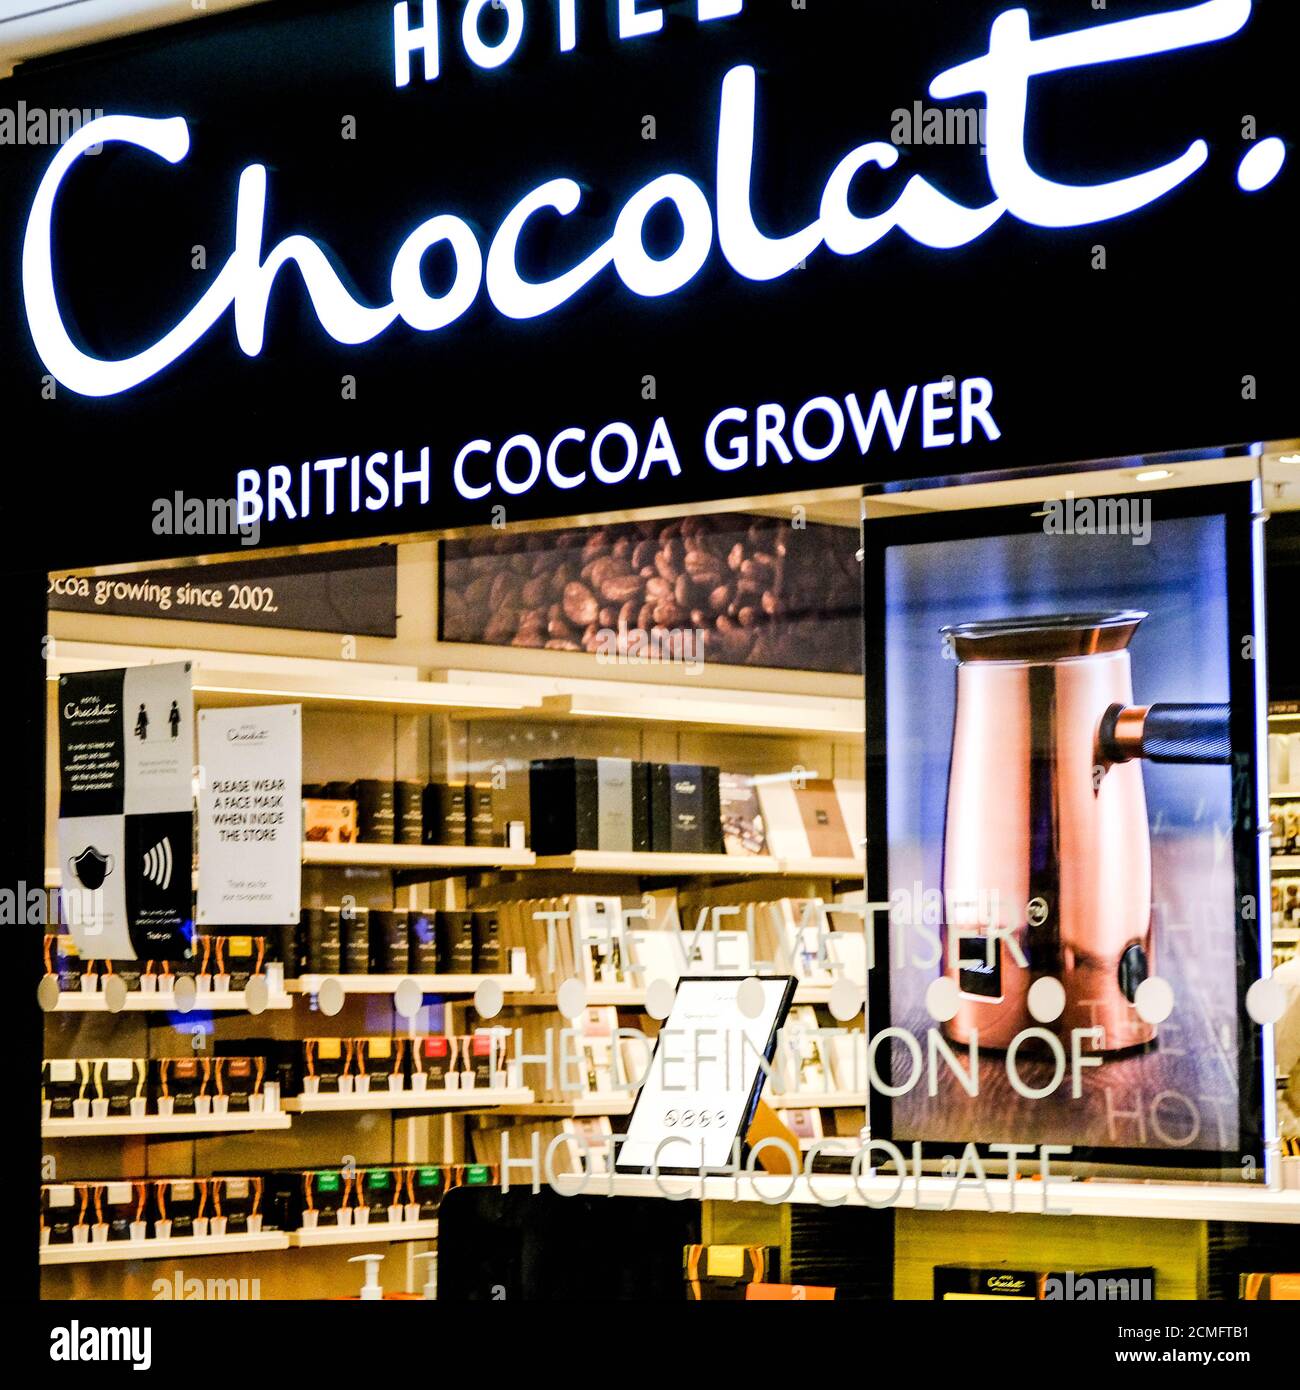 Hotel Chocolate High Street Shop Outlet senza persone Foto Stock